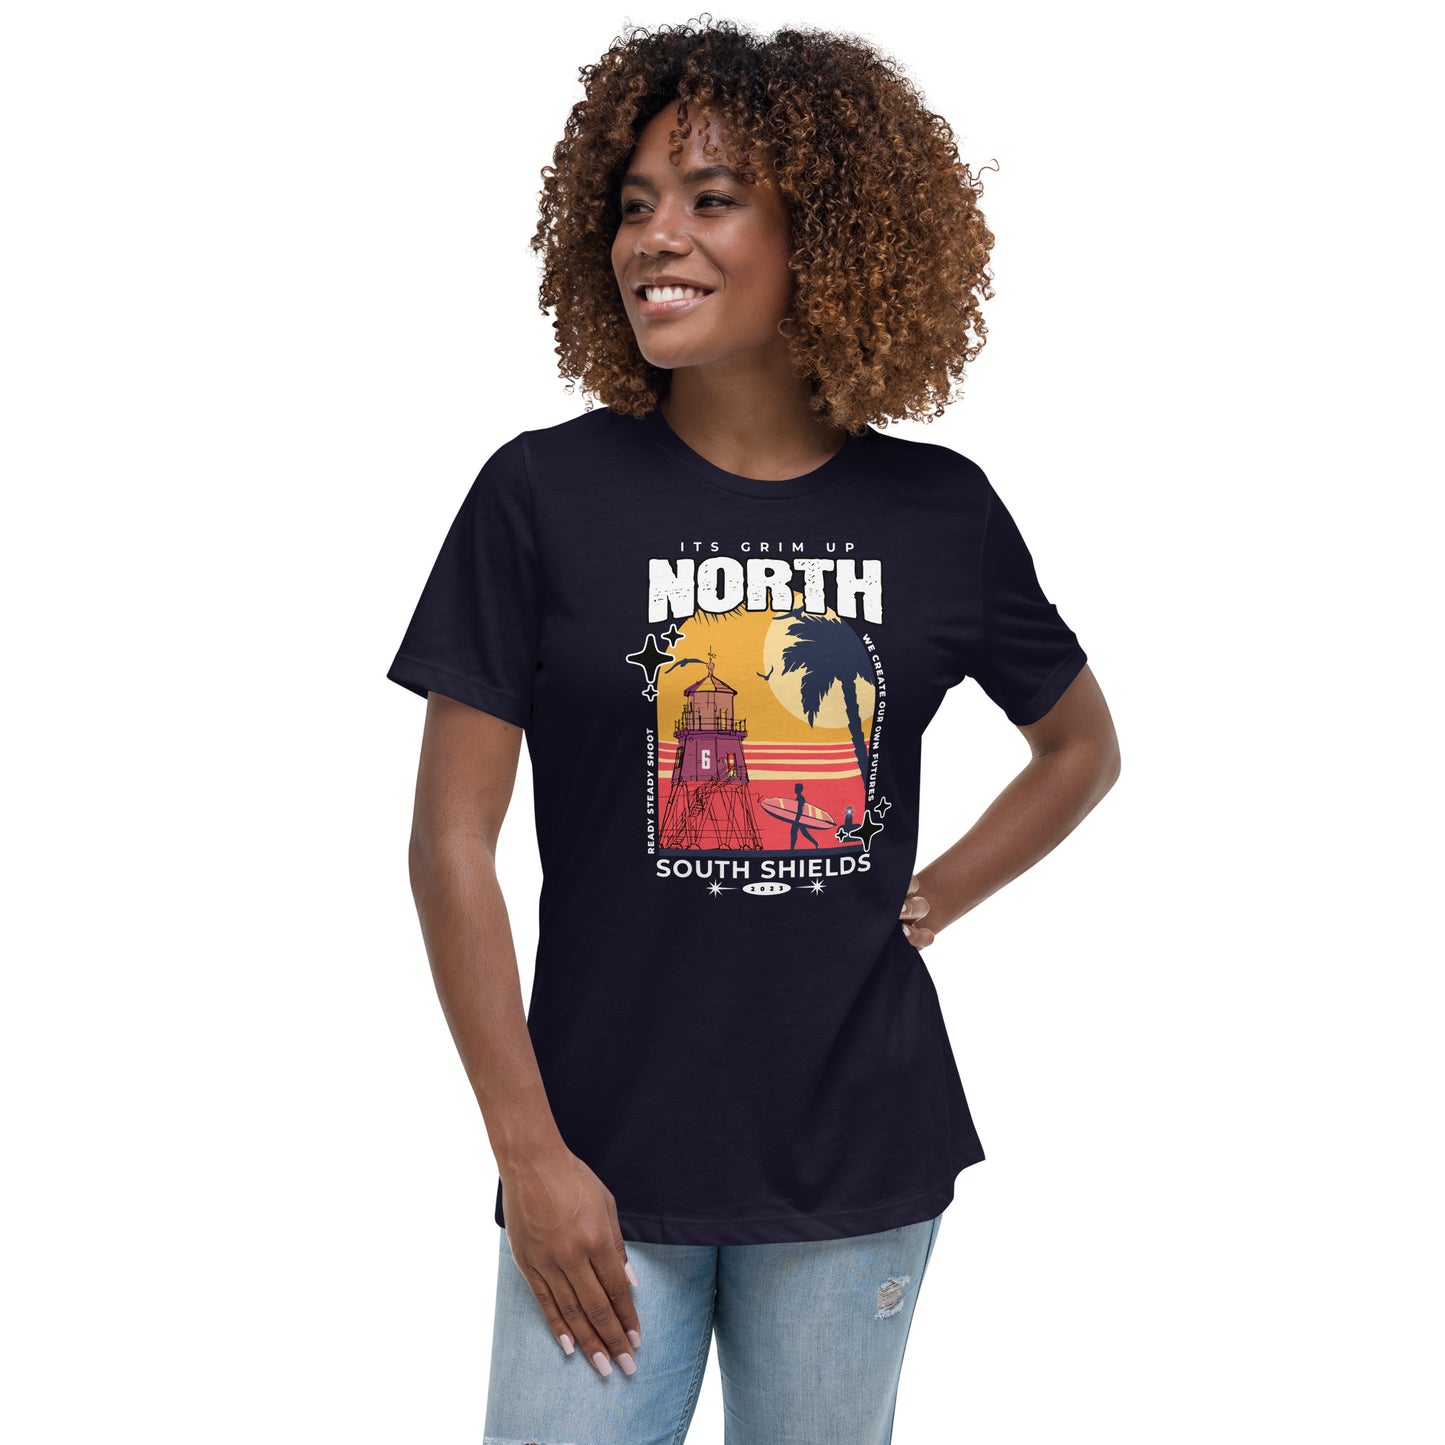 Women's Relaxed T-Shirt its grim up north